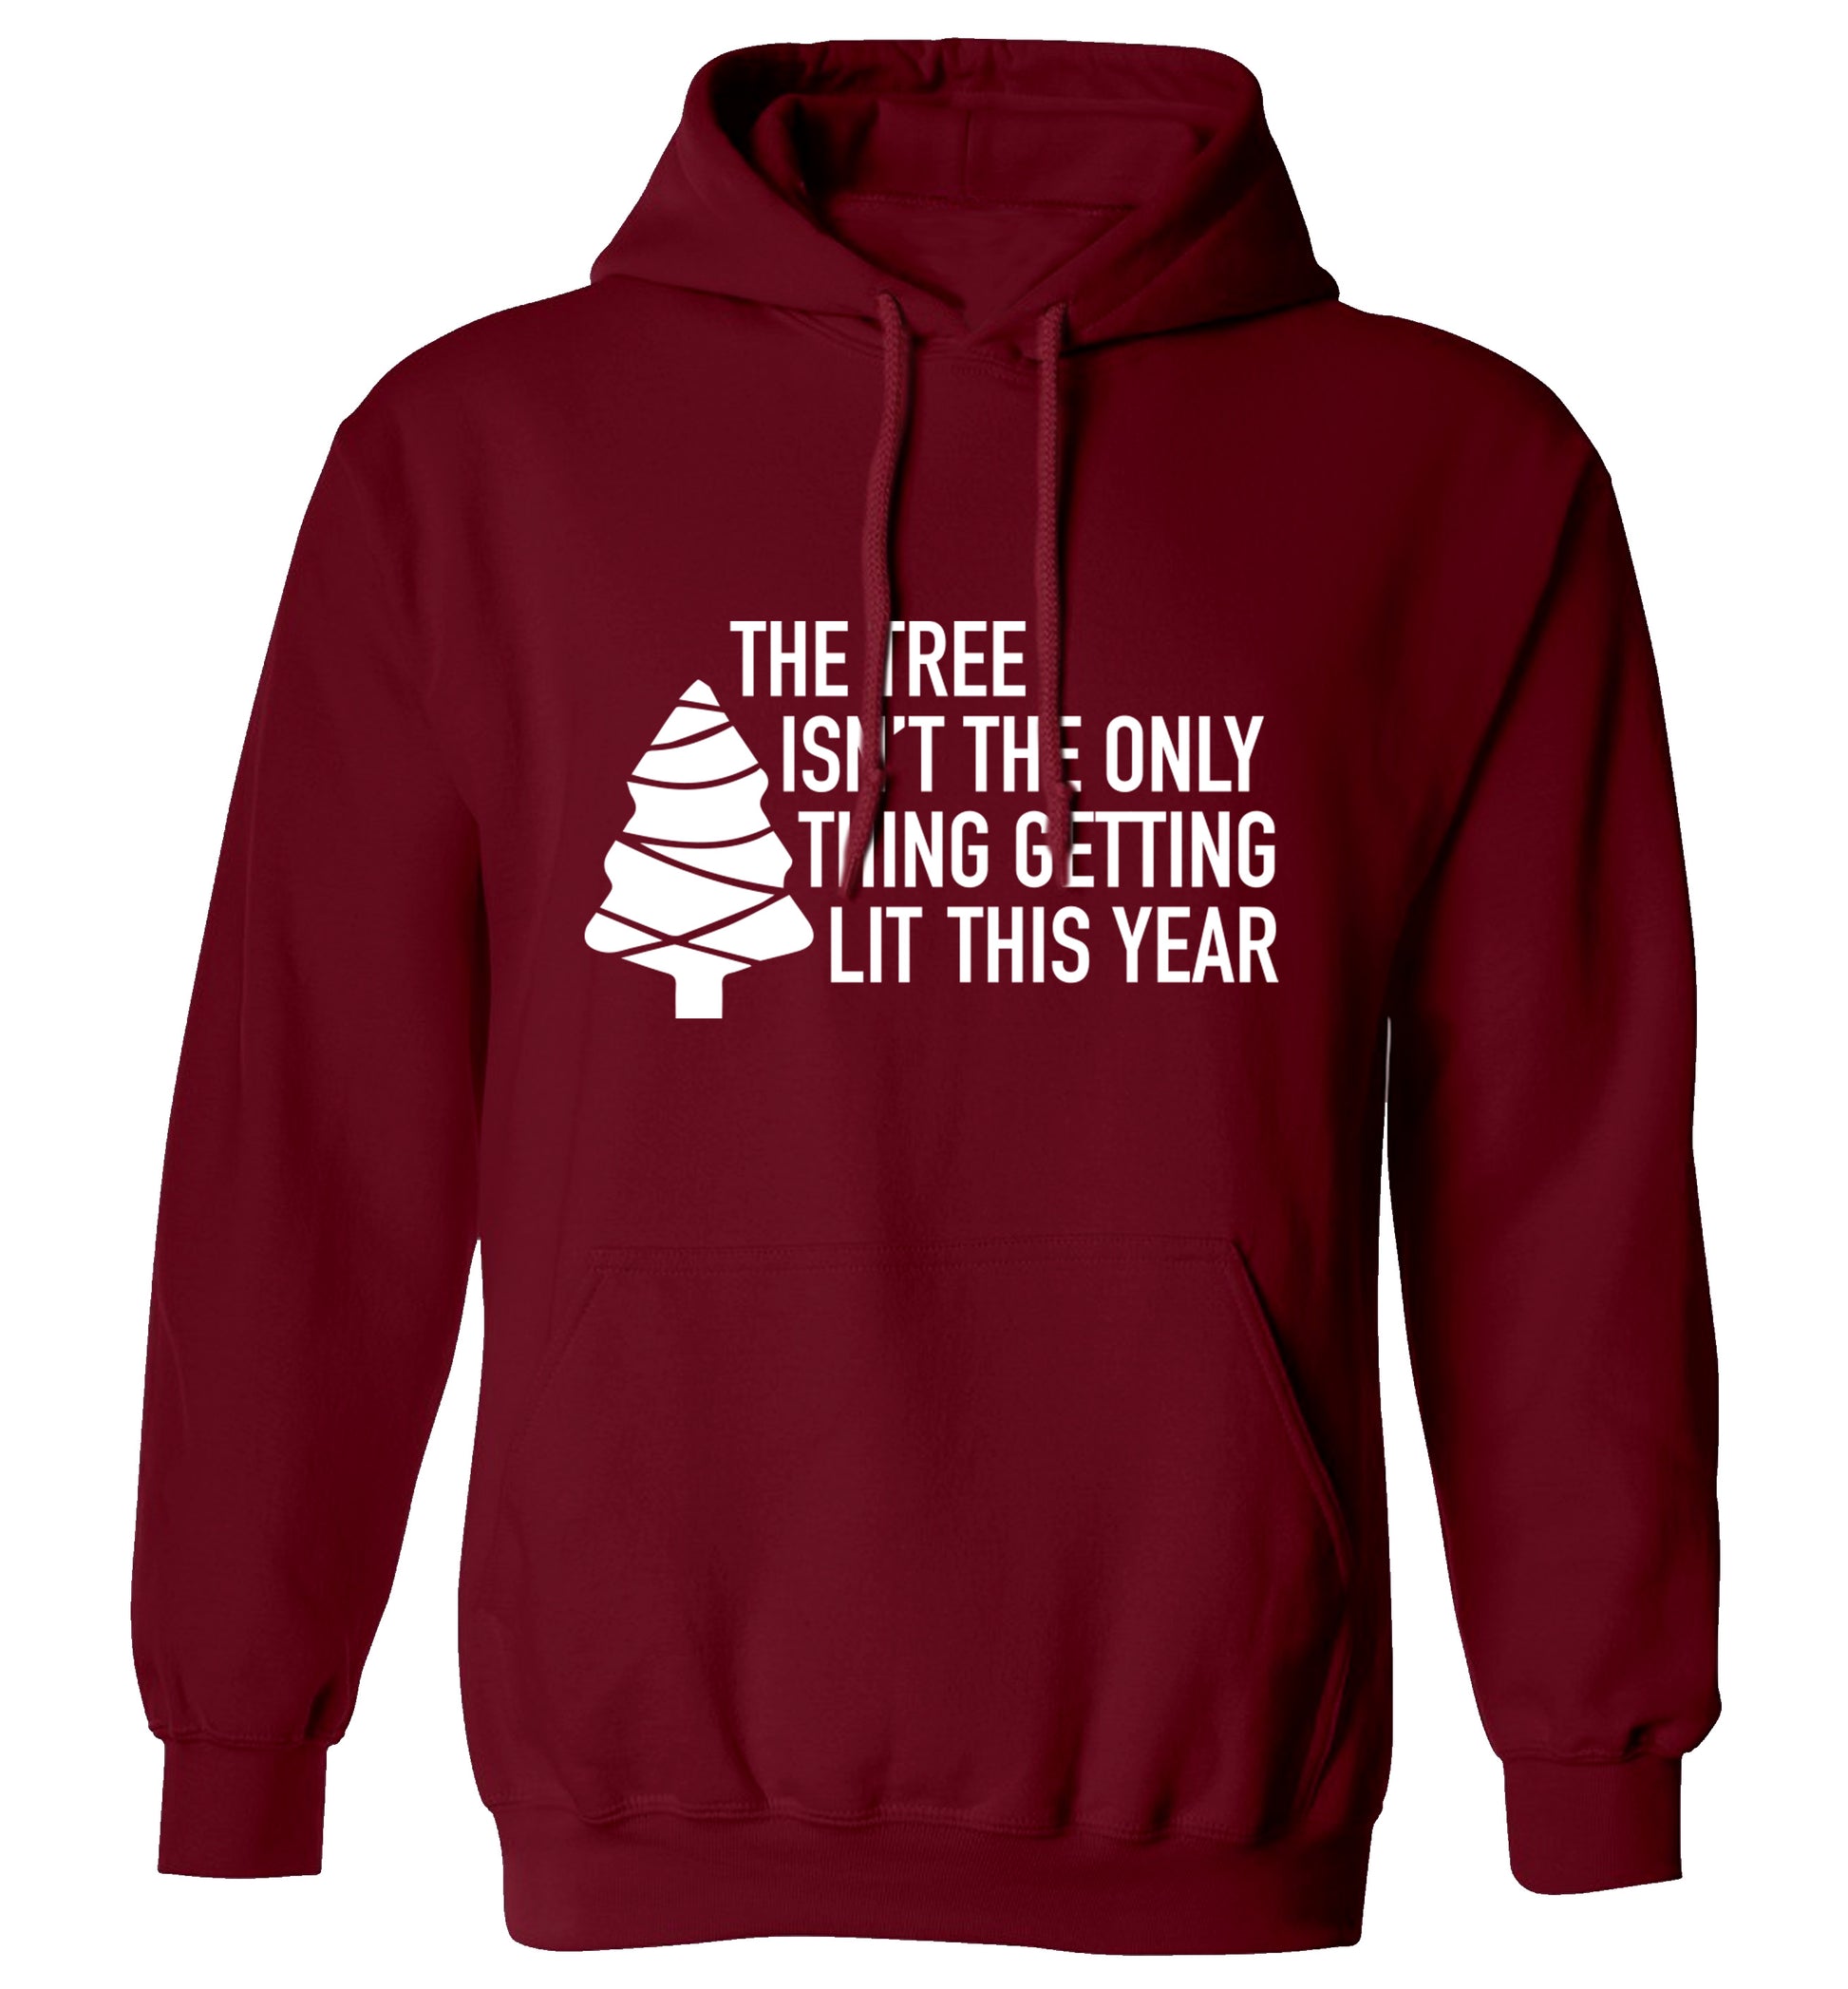 The tree isn't the only thing getting lit this year adults unisex maroon hoodie 2XL